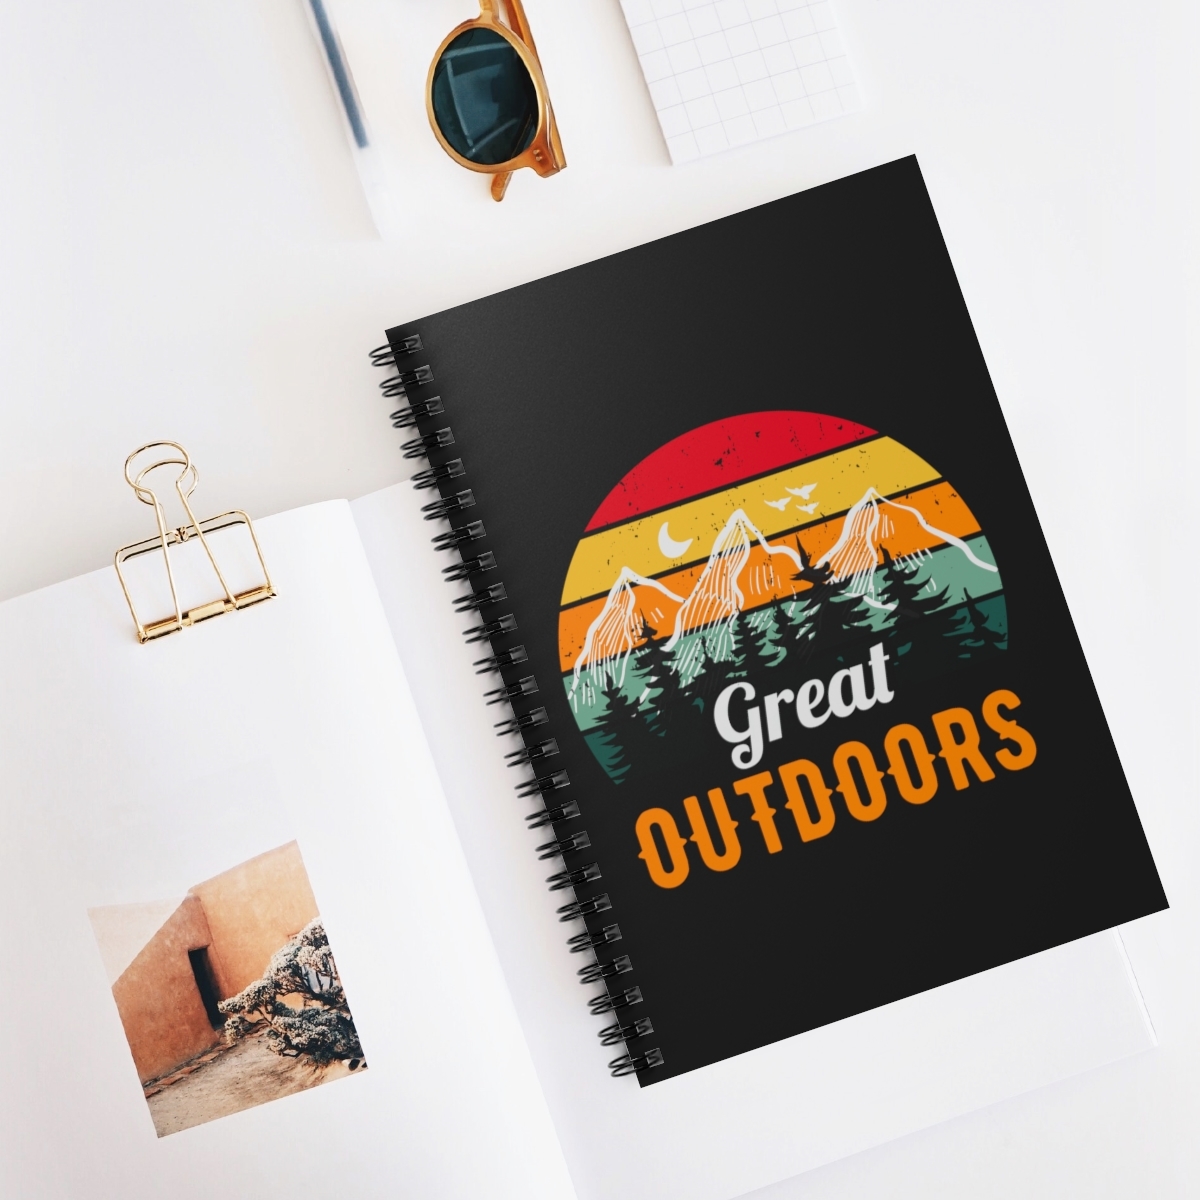 Retro Great Outdoors Spiral Notebook - Ruled Line - 6x8 inches - 118 Pages - $18.54